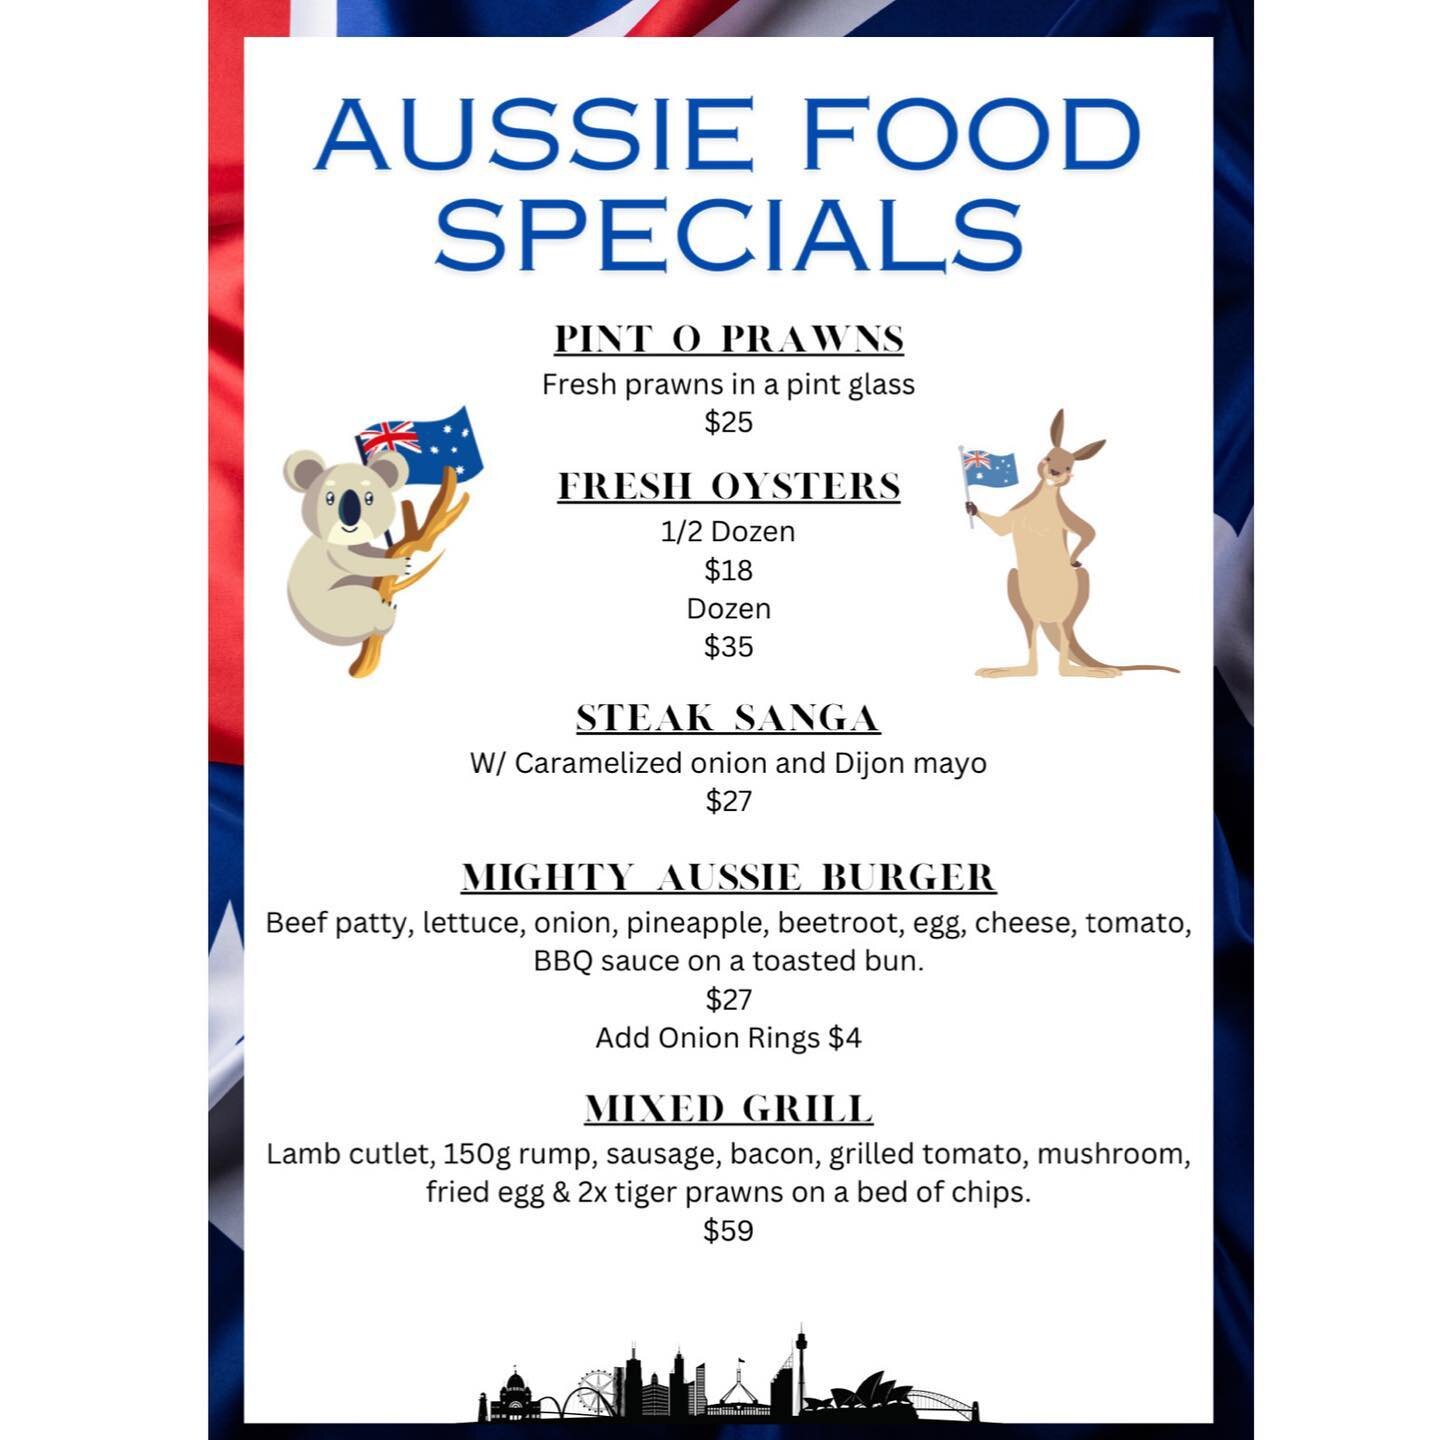 AUSTRALIA DAY FOOD SPECIALS!! Here&rsquo;s what to expect for our Australia Day tasty specials! Available from 12pm until sold out! 💙☀️